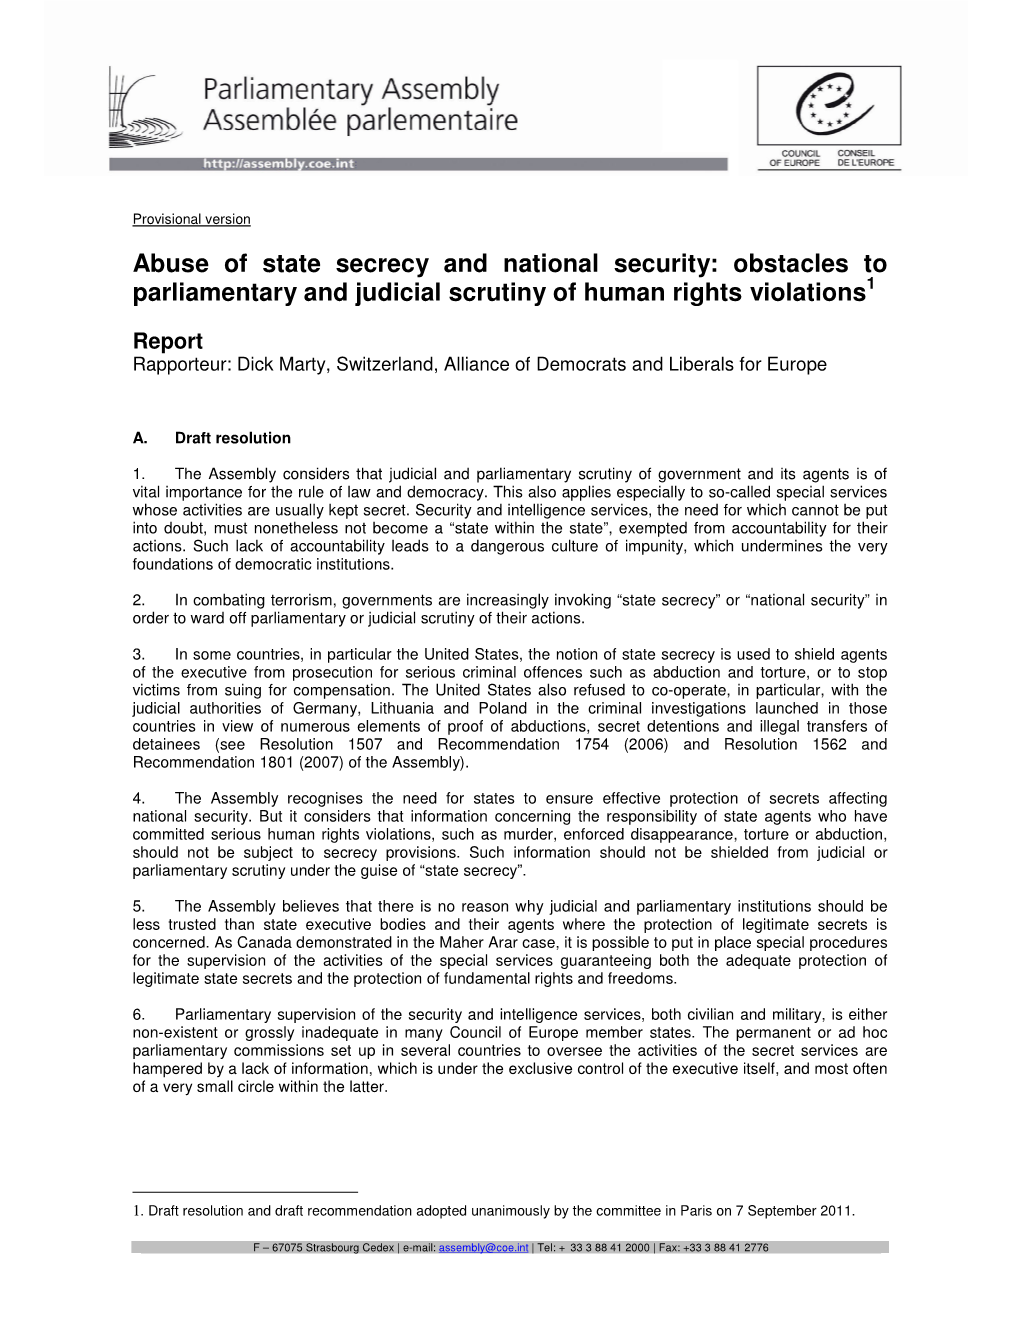 Abuse of State Secrecy and National Security: Obstacles to Parliamentary and Judicial Scrutiny of Human Rights Violations 1